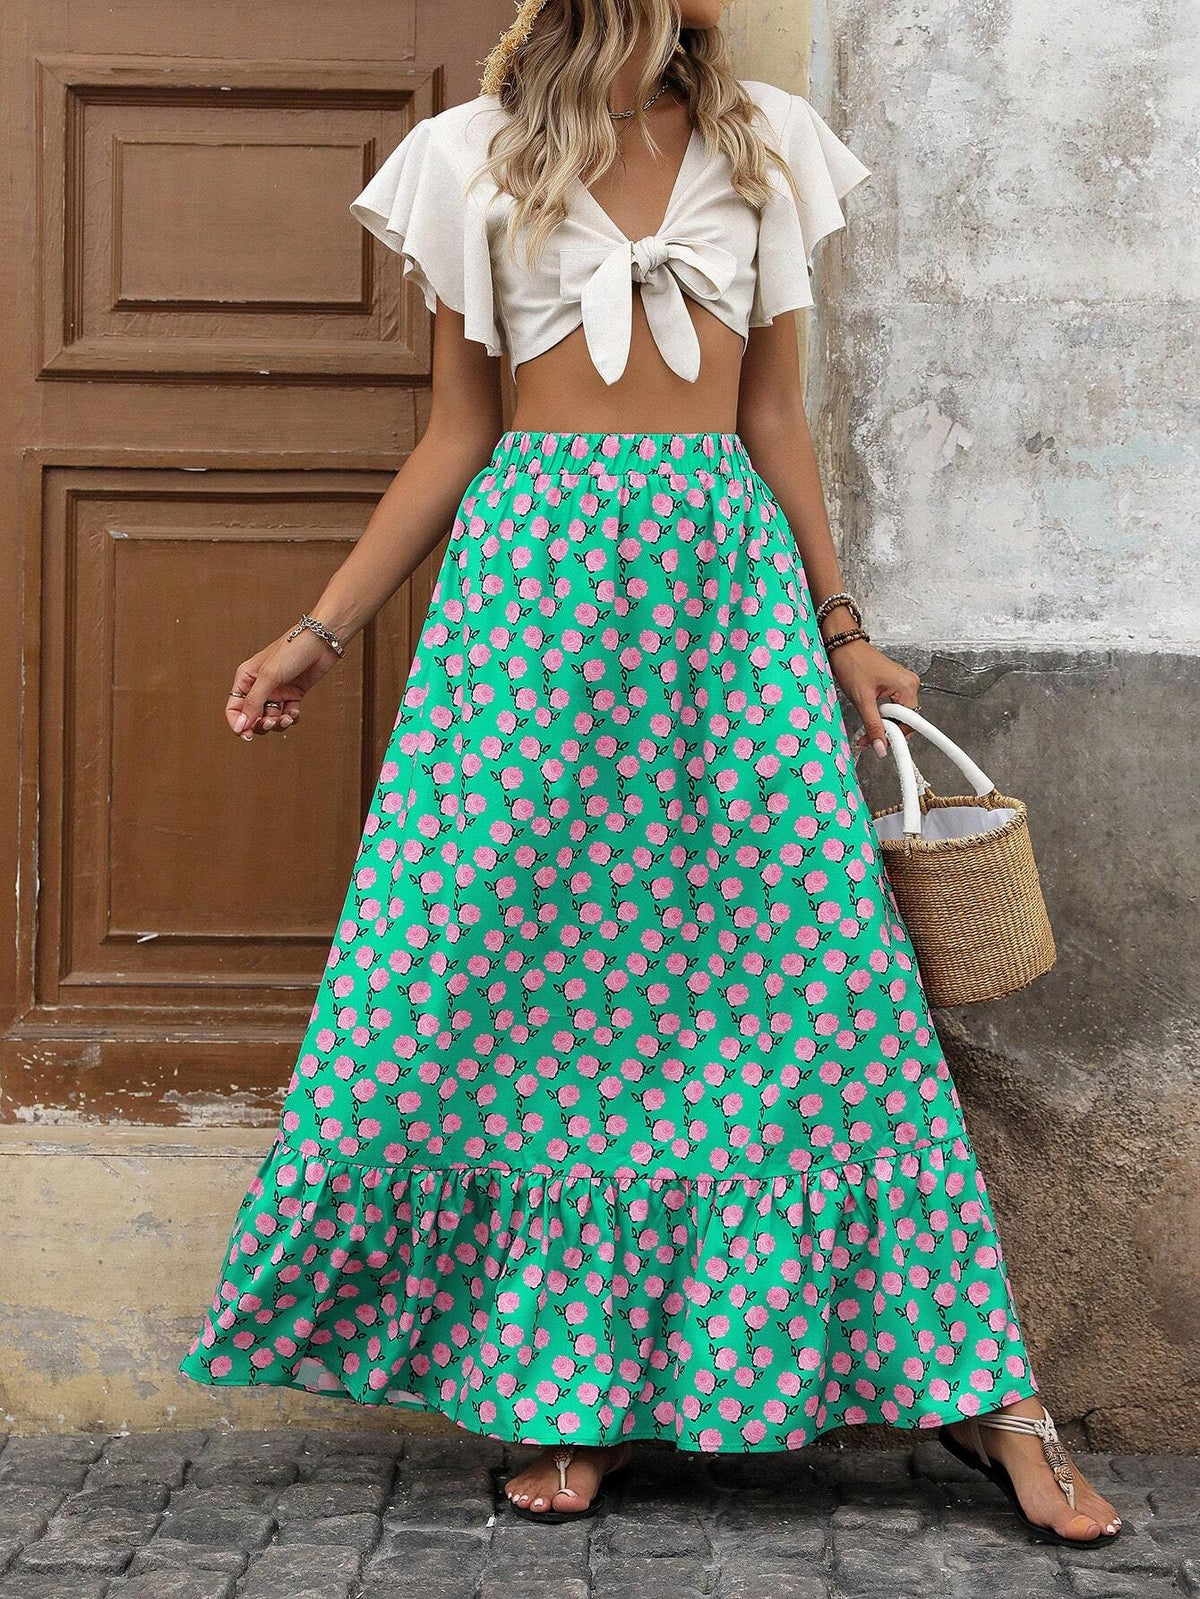 Frenchy Women's Summer Holiday Long Floral Skirt